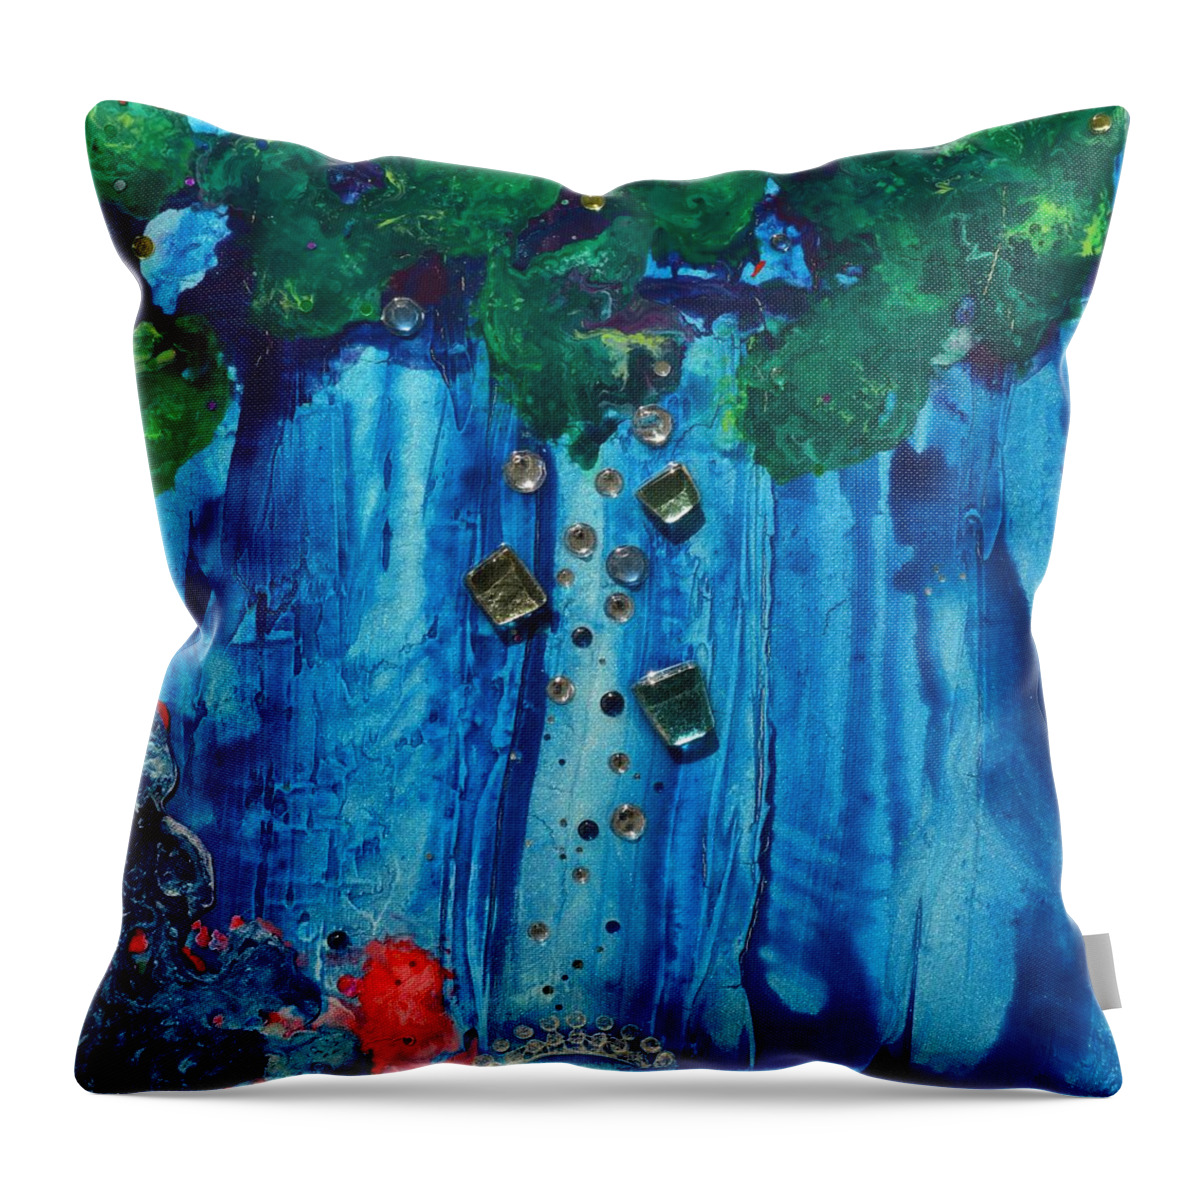 Fairy Throw Pillow featuring the painting Moon Bridge by MiMi Stirn